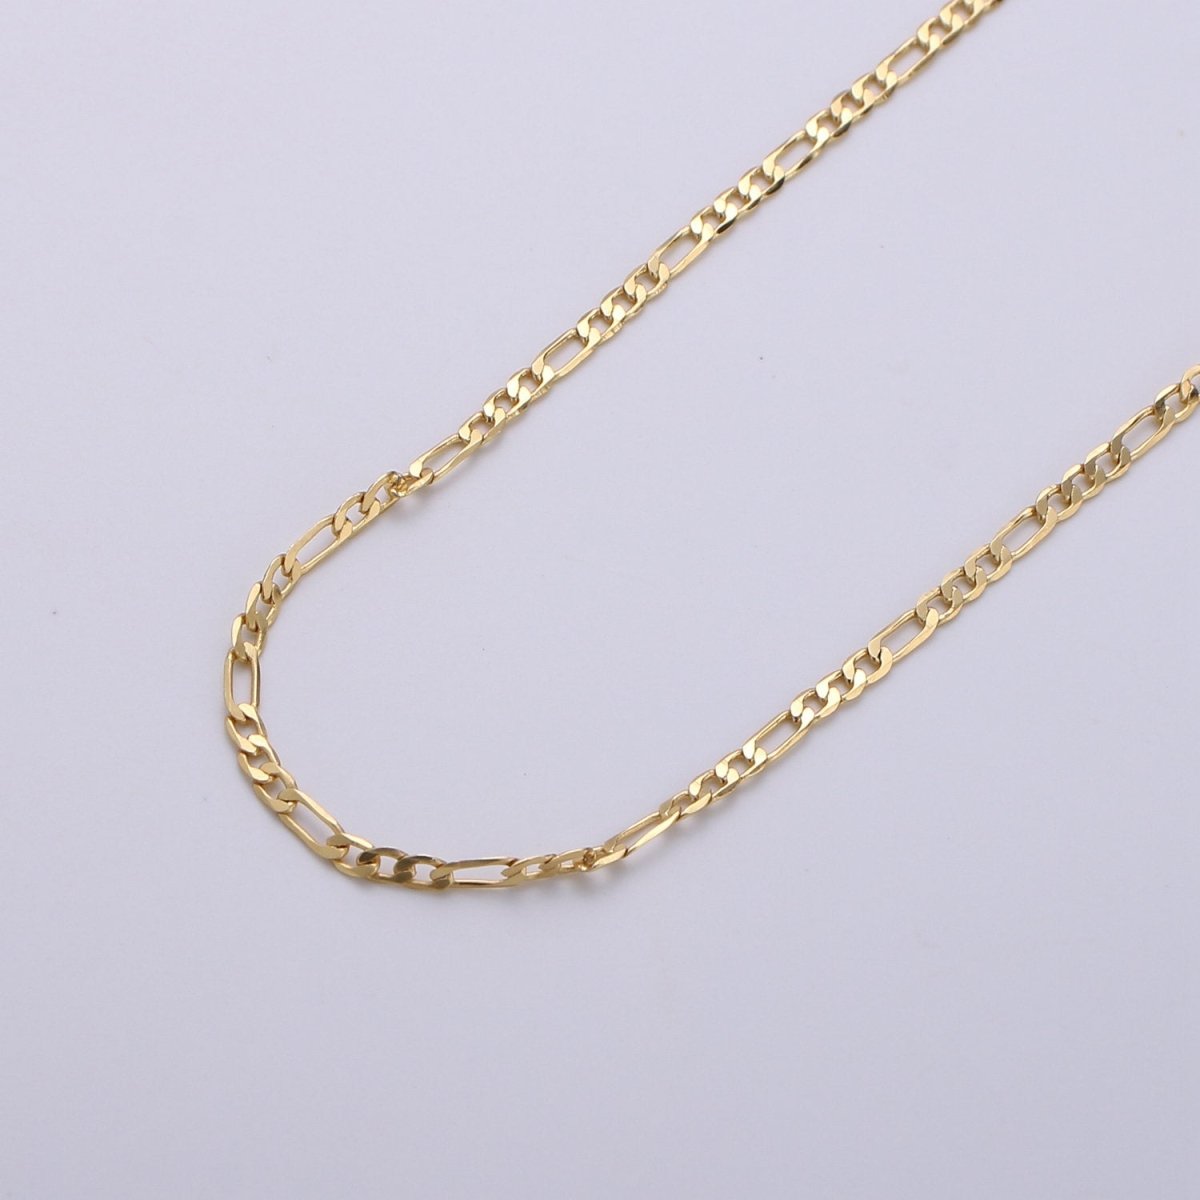 4mm Figaro Chain, 24K Gold Filled Figaro Chain, Flat Figaro Chain Jewelry Chain Sold by the Yard For Necklace Bracelet Anklet Supply Component | ROLL-226 Clearance Pricing - DLUXCA